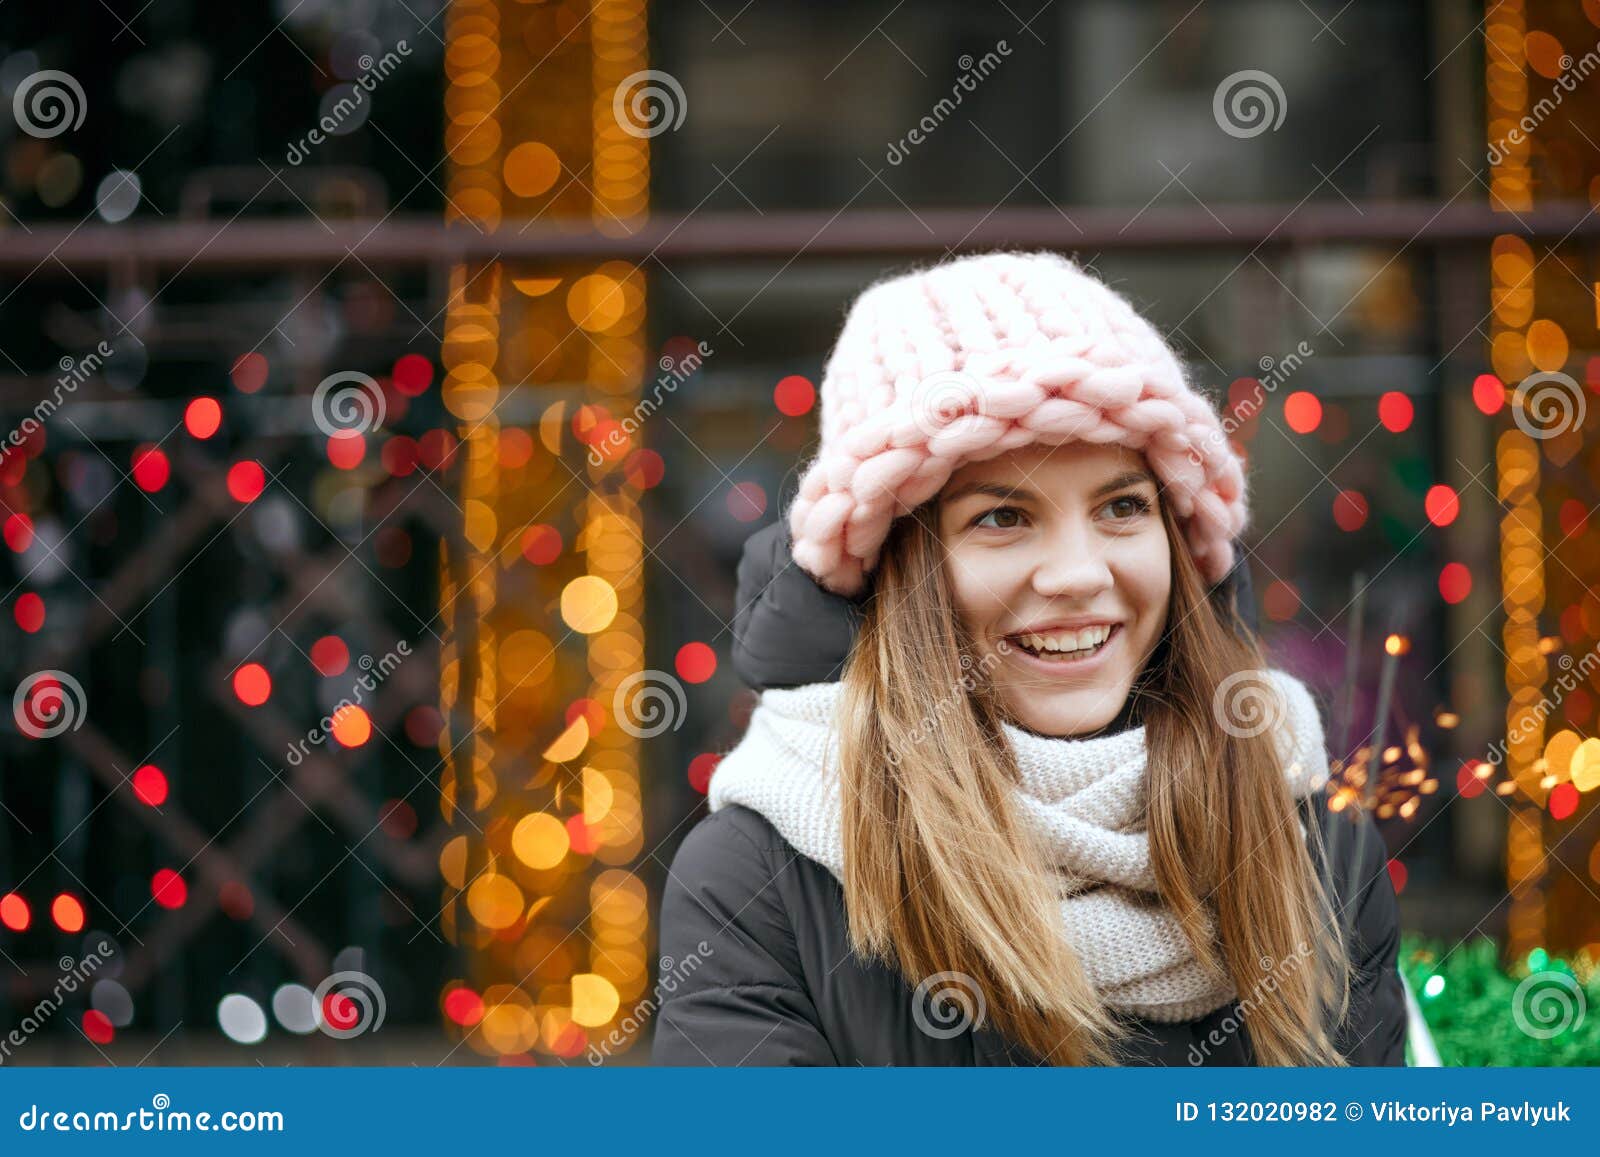 Adorable Blonde Girl Wearing Winter Outfit Celebrating Christmas Stock ...